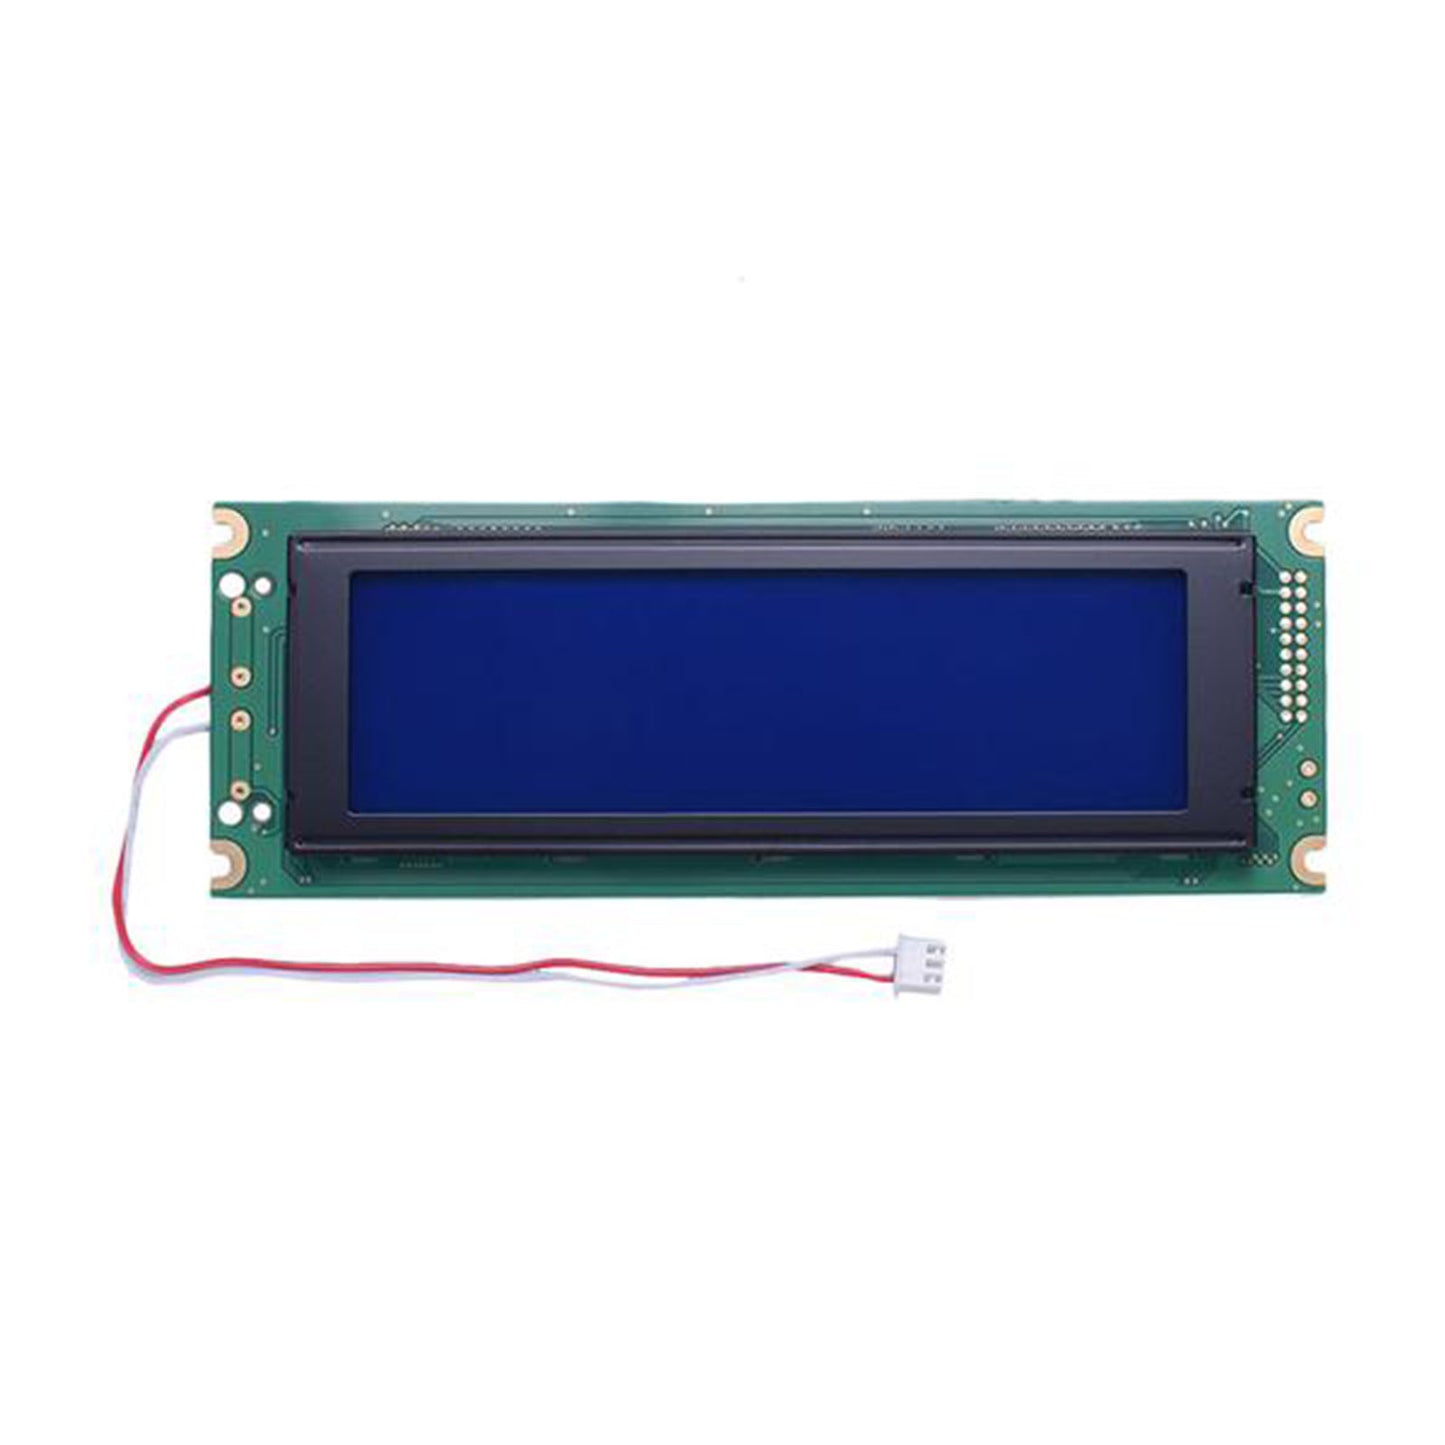 5.46-inch 240x64 LCD Graphic blue backlight display module with MCU interface